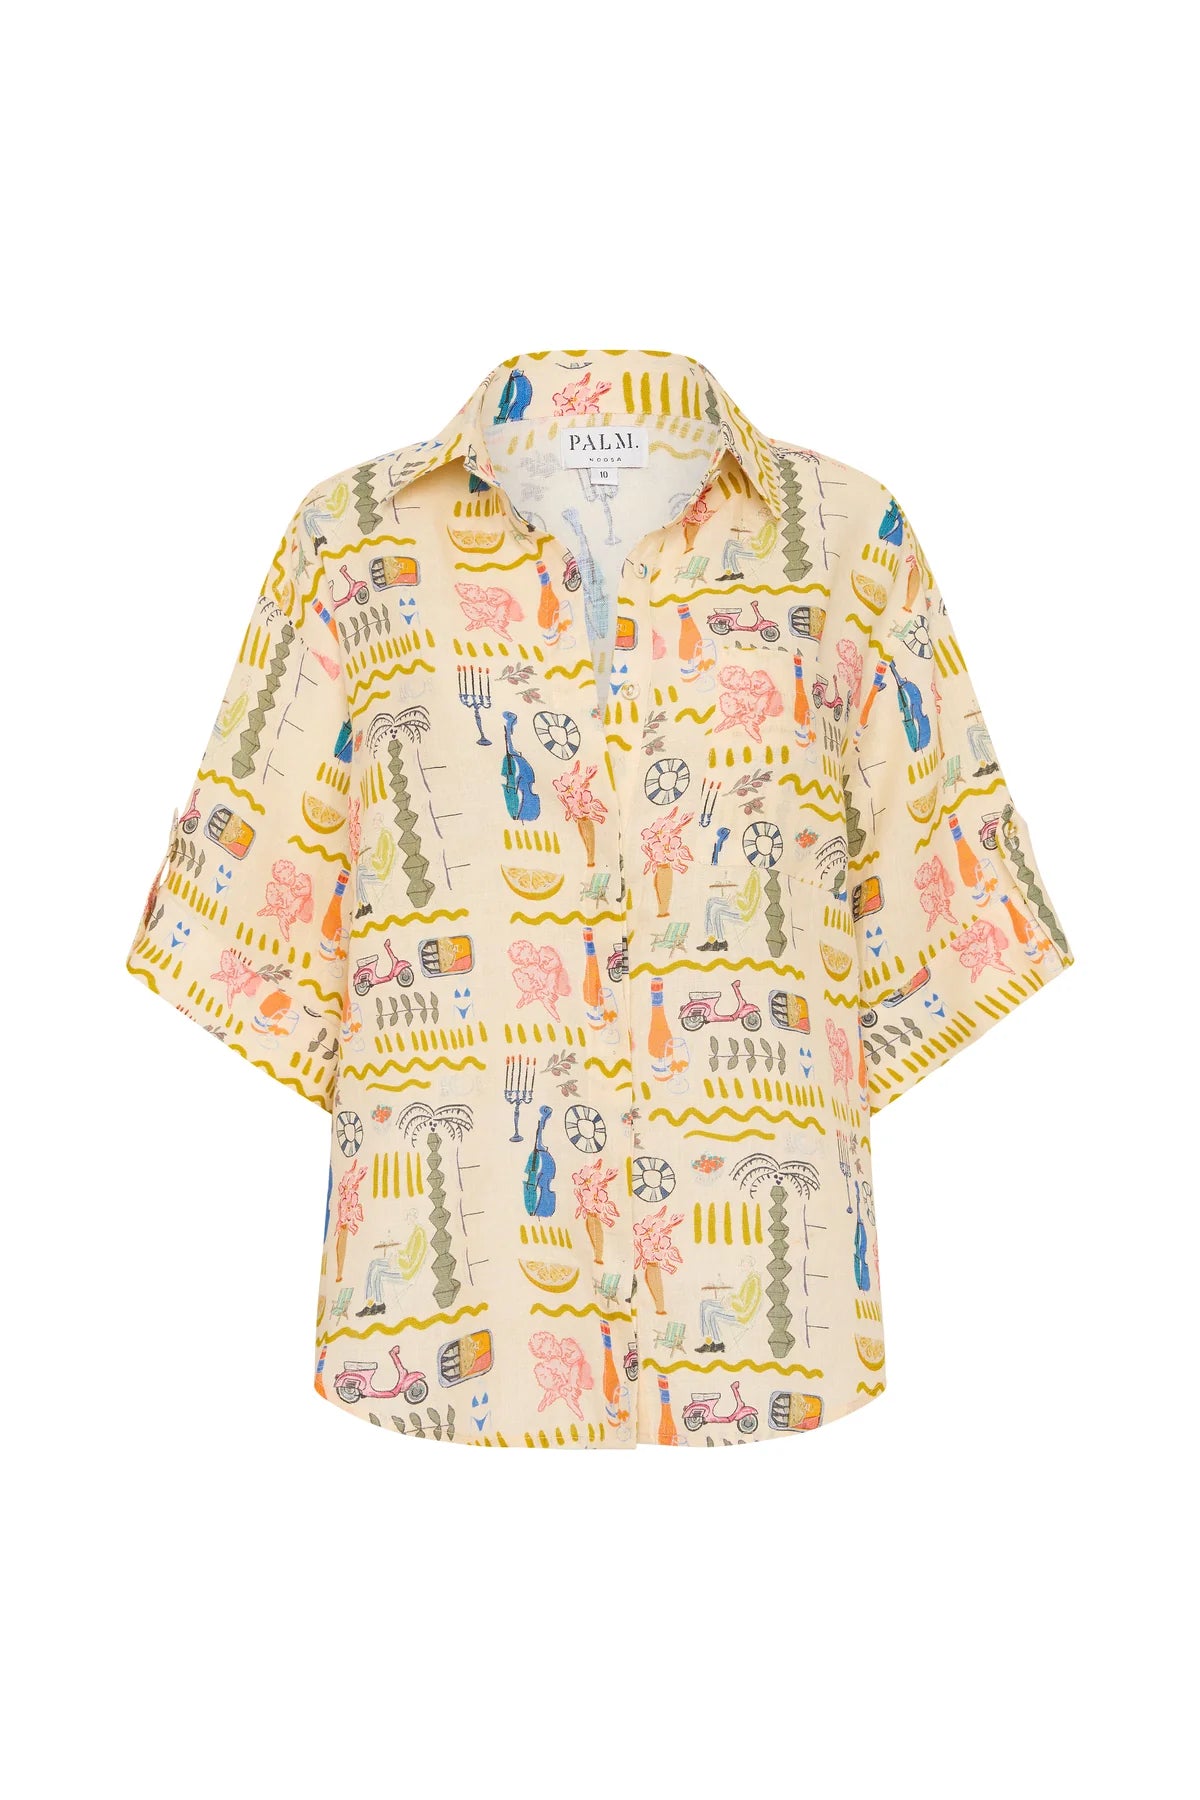 Printed linen shirt with short sleeves and a classic collar in a summer print